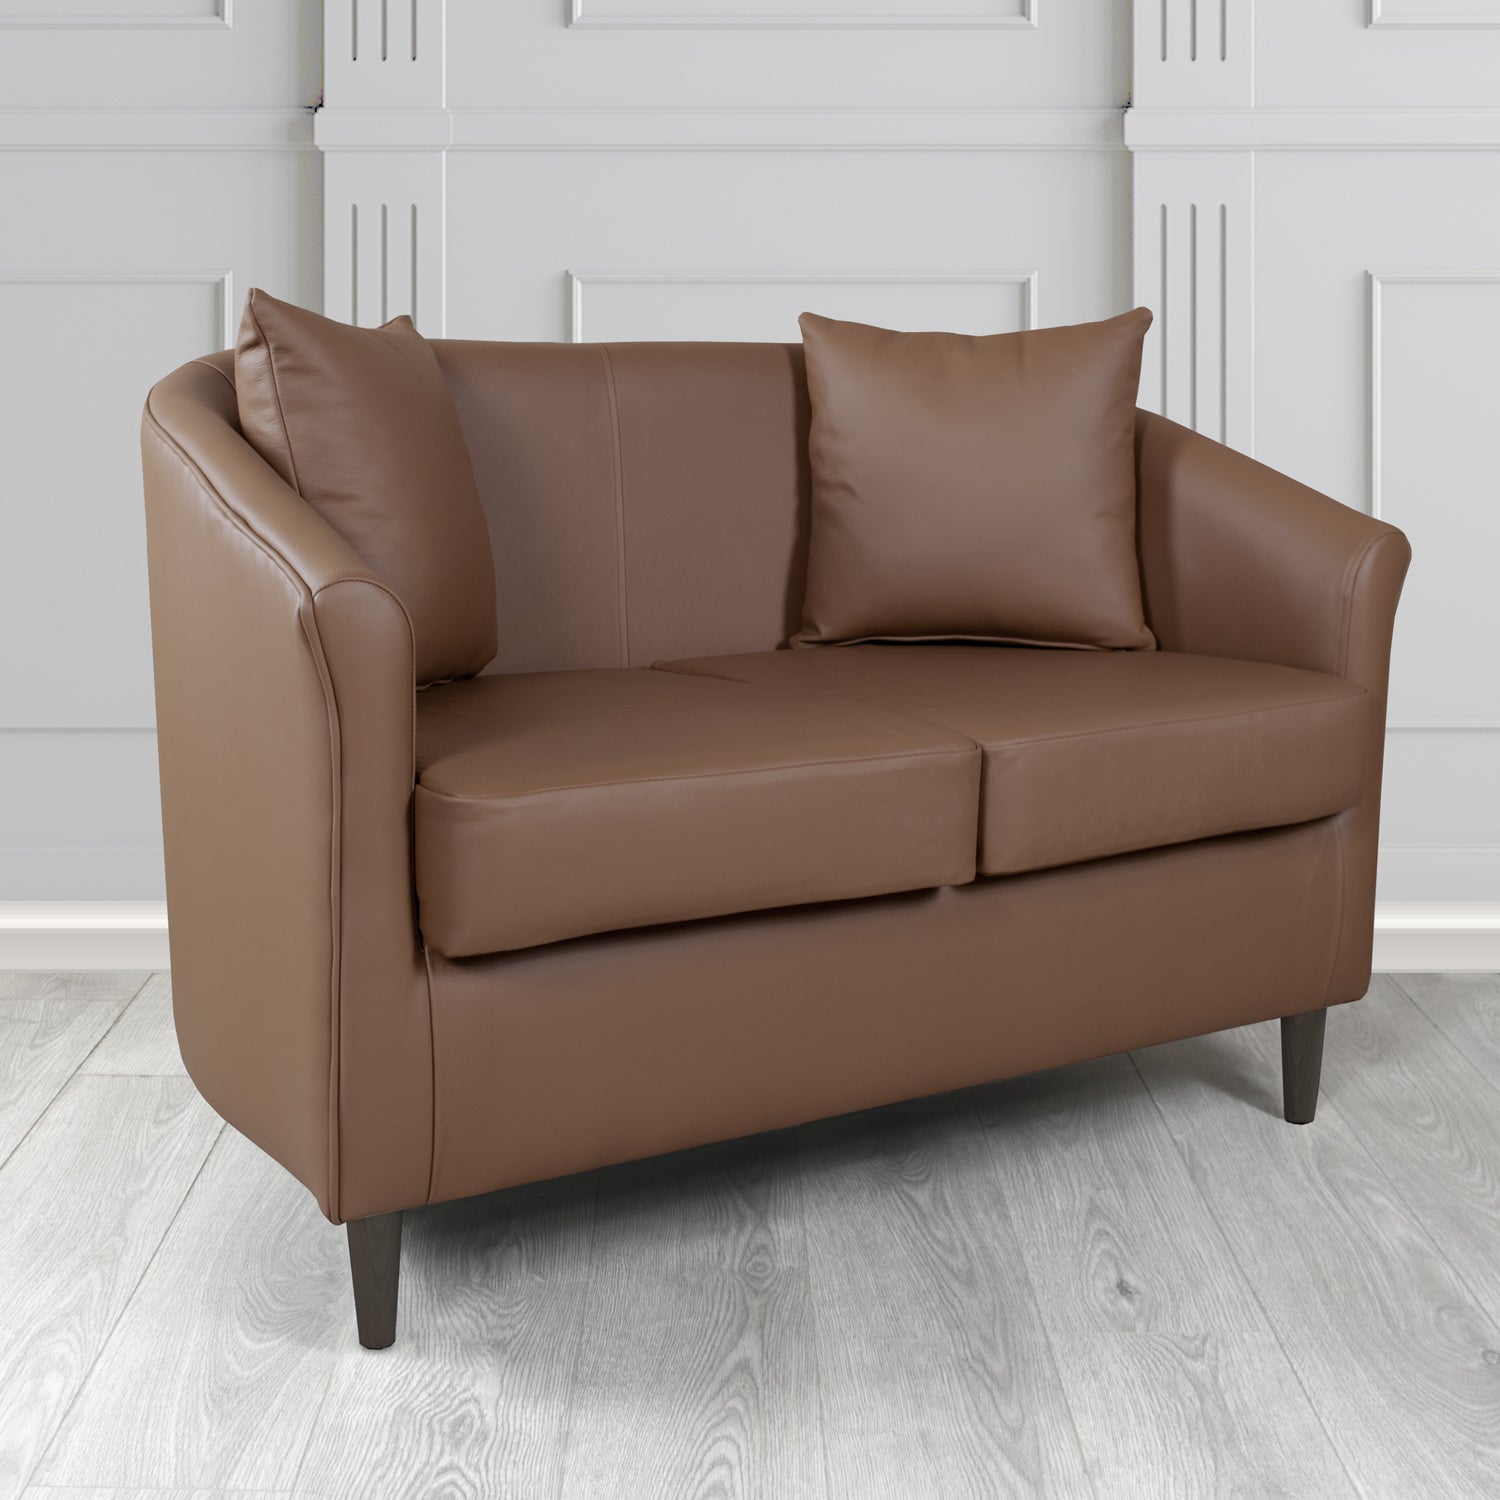 St Tropez Shelly Mocha Crib 5 Genuine Leather 2 Seater Tub Sofa with Scatter Cushions - The Tub Chair Shop